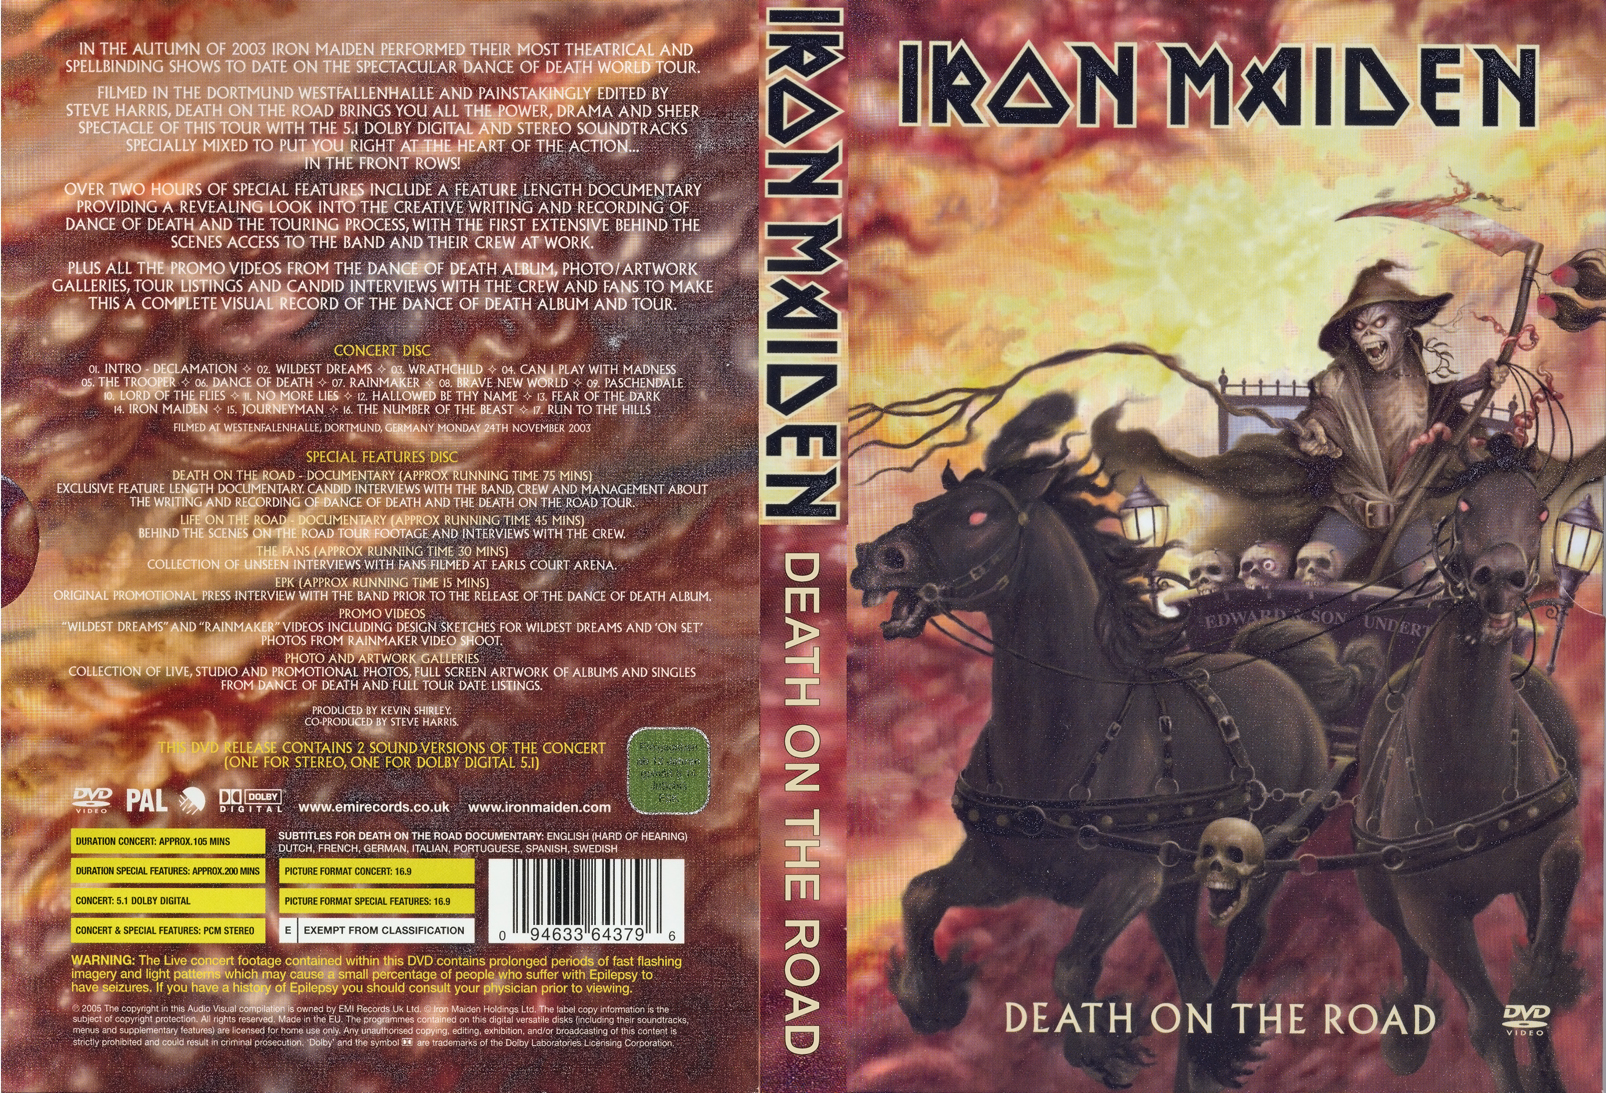 Jaquette DVD Iron Maiden - Death on the road